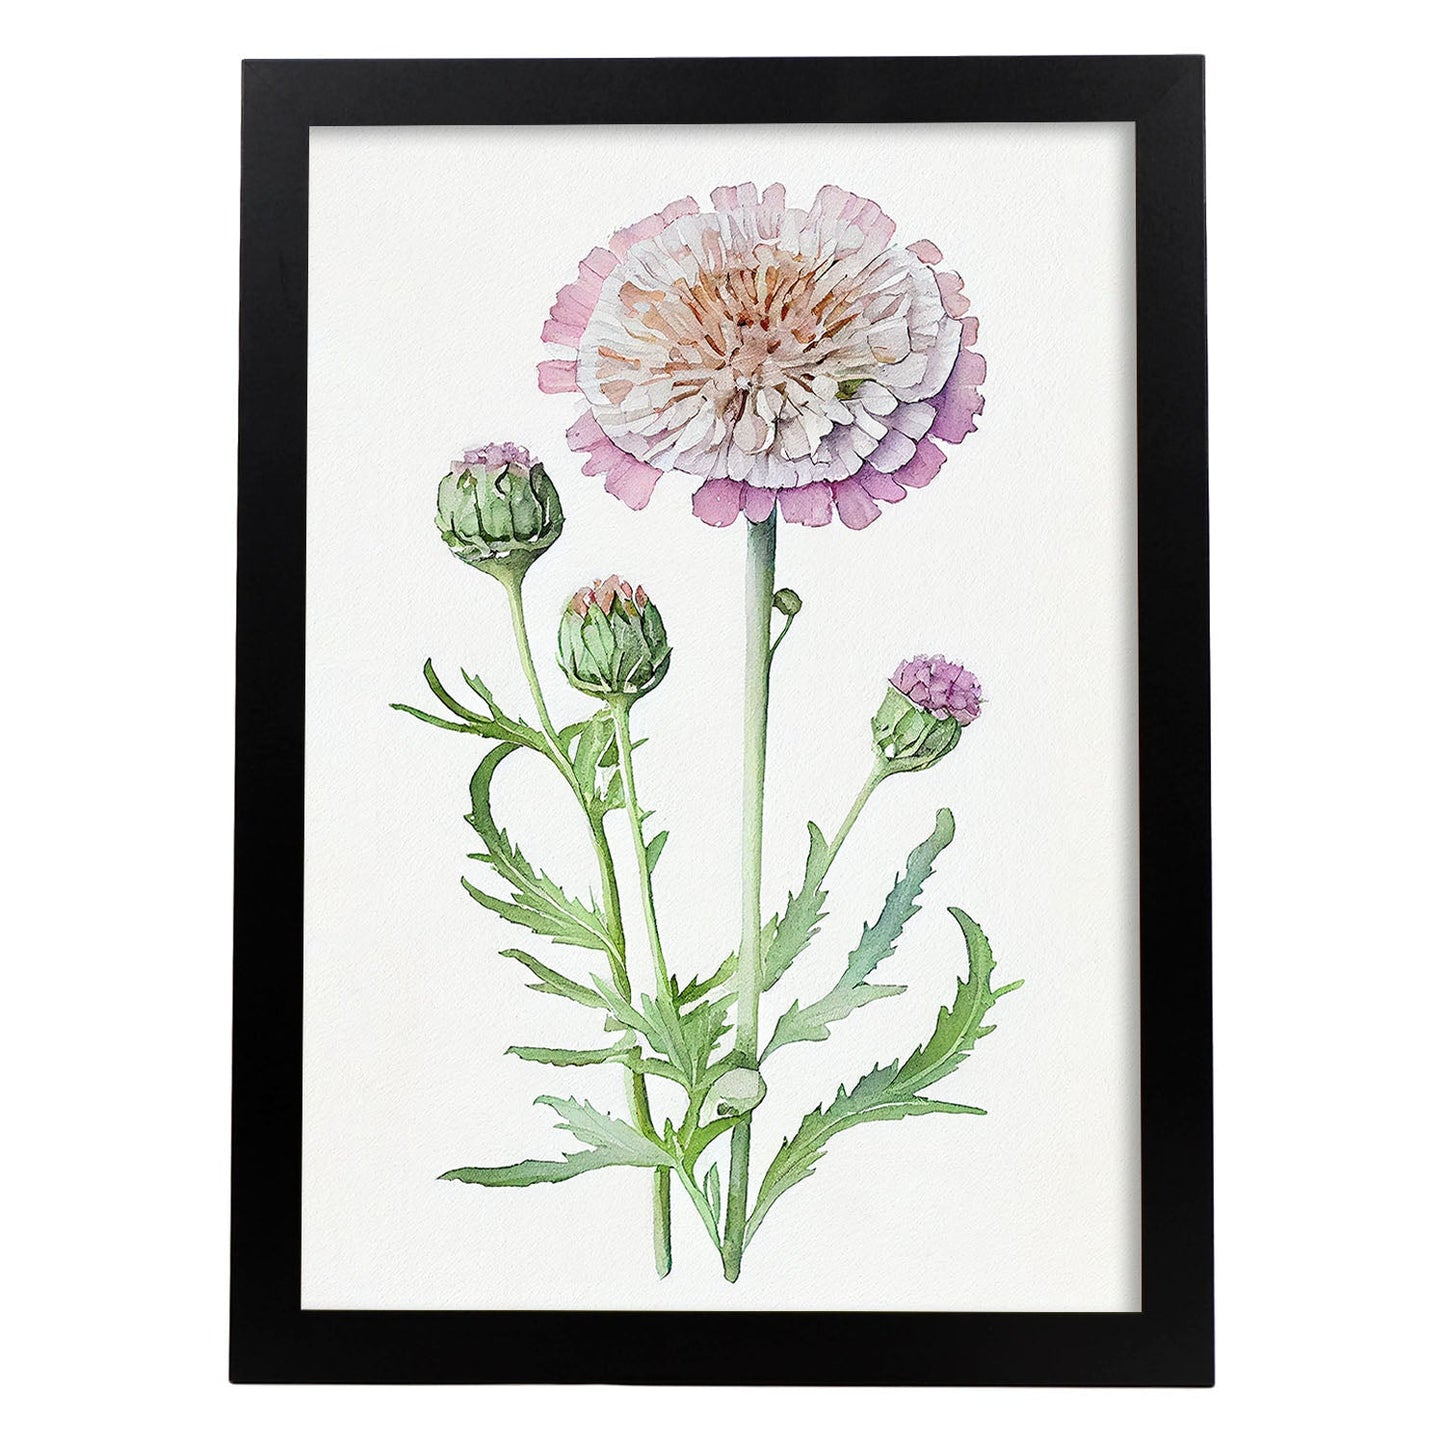 Nacnic watercolor minmal Scabiosa_4. Aesthetic Wall Art Prints for Bedroom or Living Room Design.